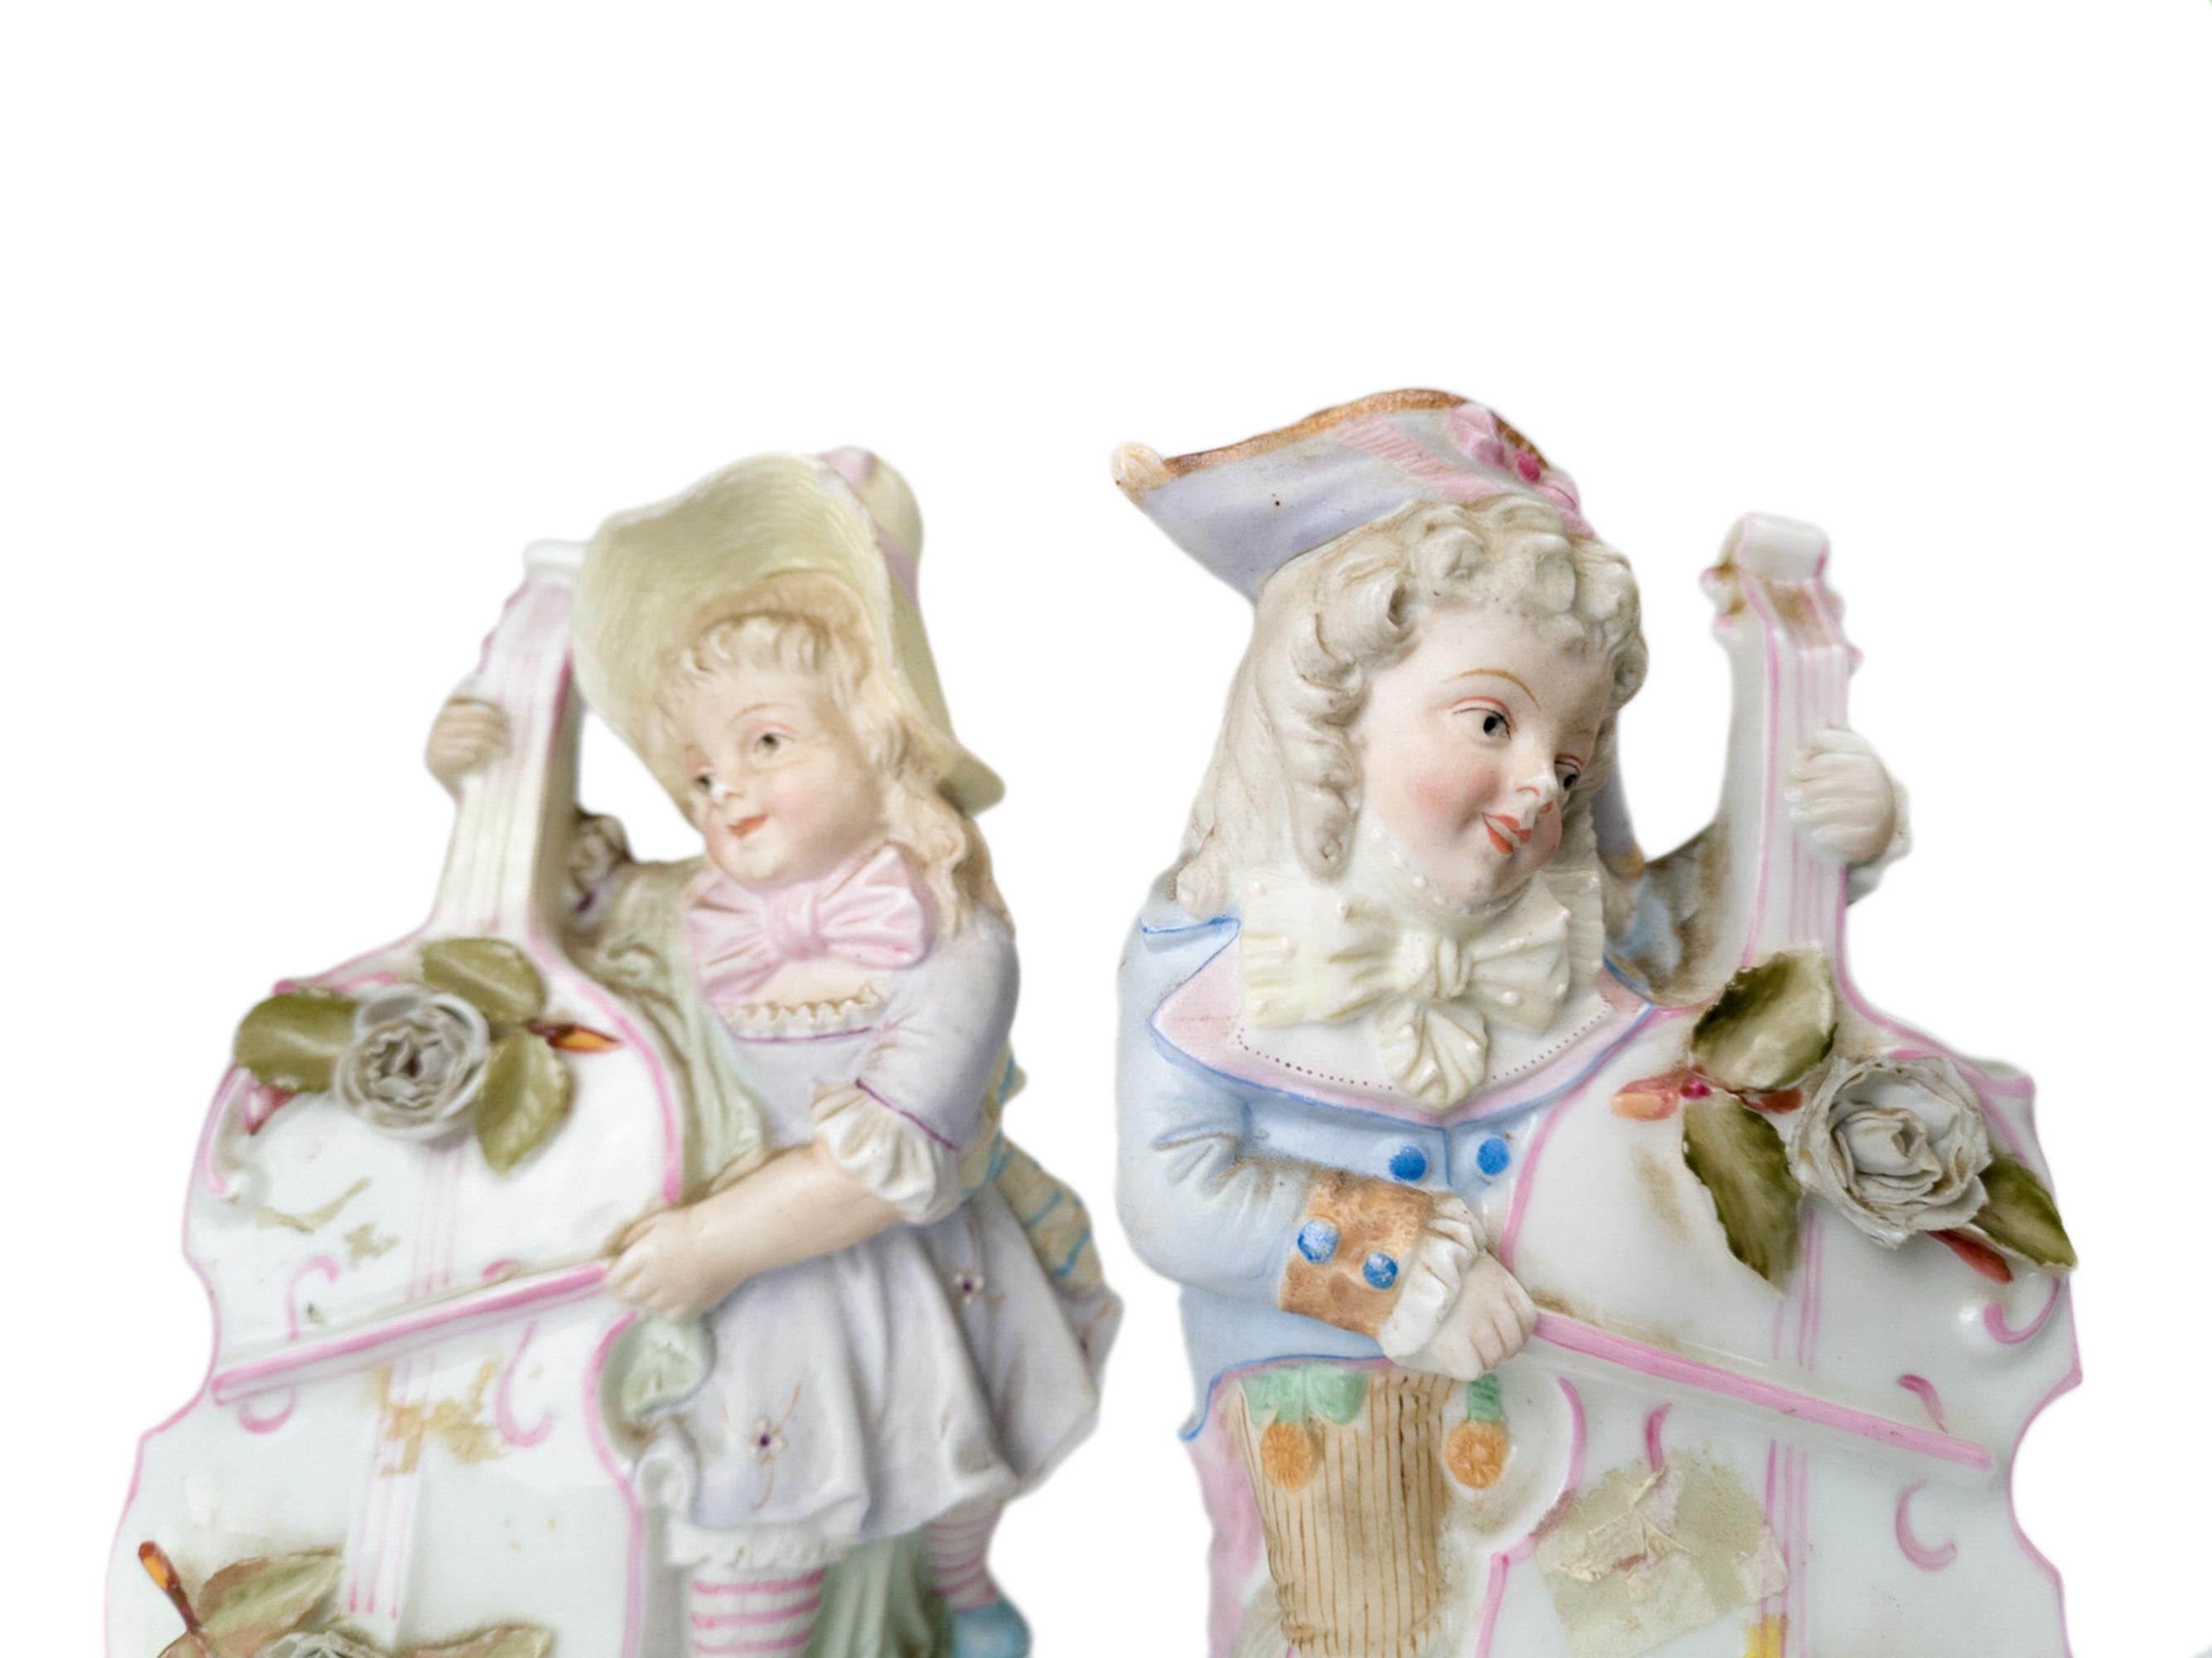 Musicians Porcelain Figures Vases by Heubach Brothers, Early 20th Century In Good Condition For Sale In Lisbon, PT